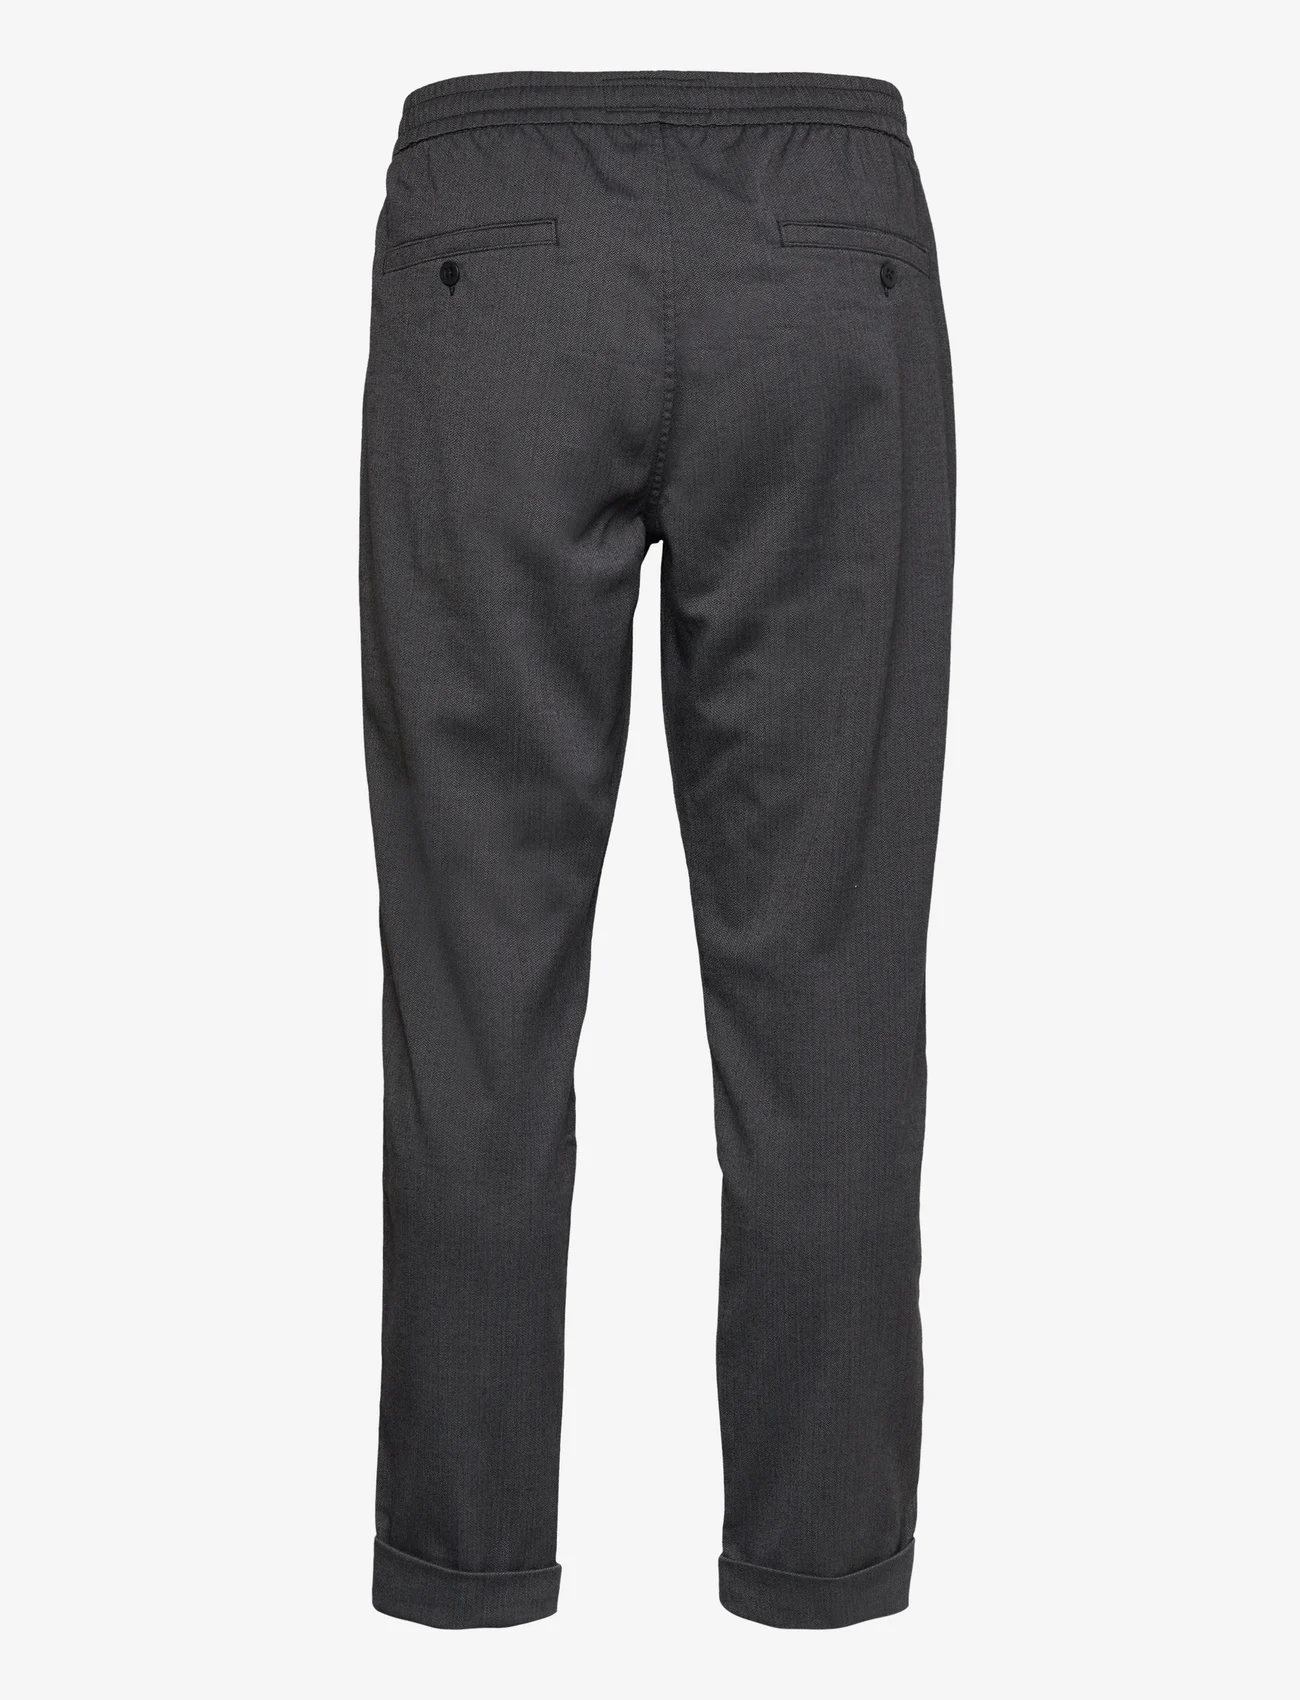 Abercrombie & Fitch - ANF MENS PANTS - ikdienas bikses - charcoal texture - 1